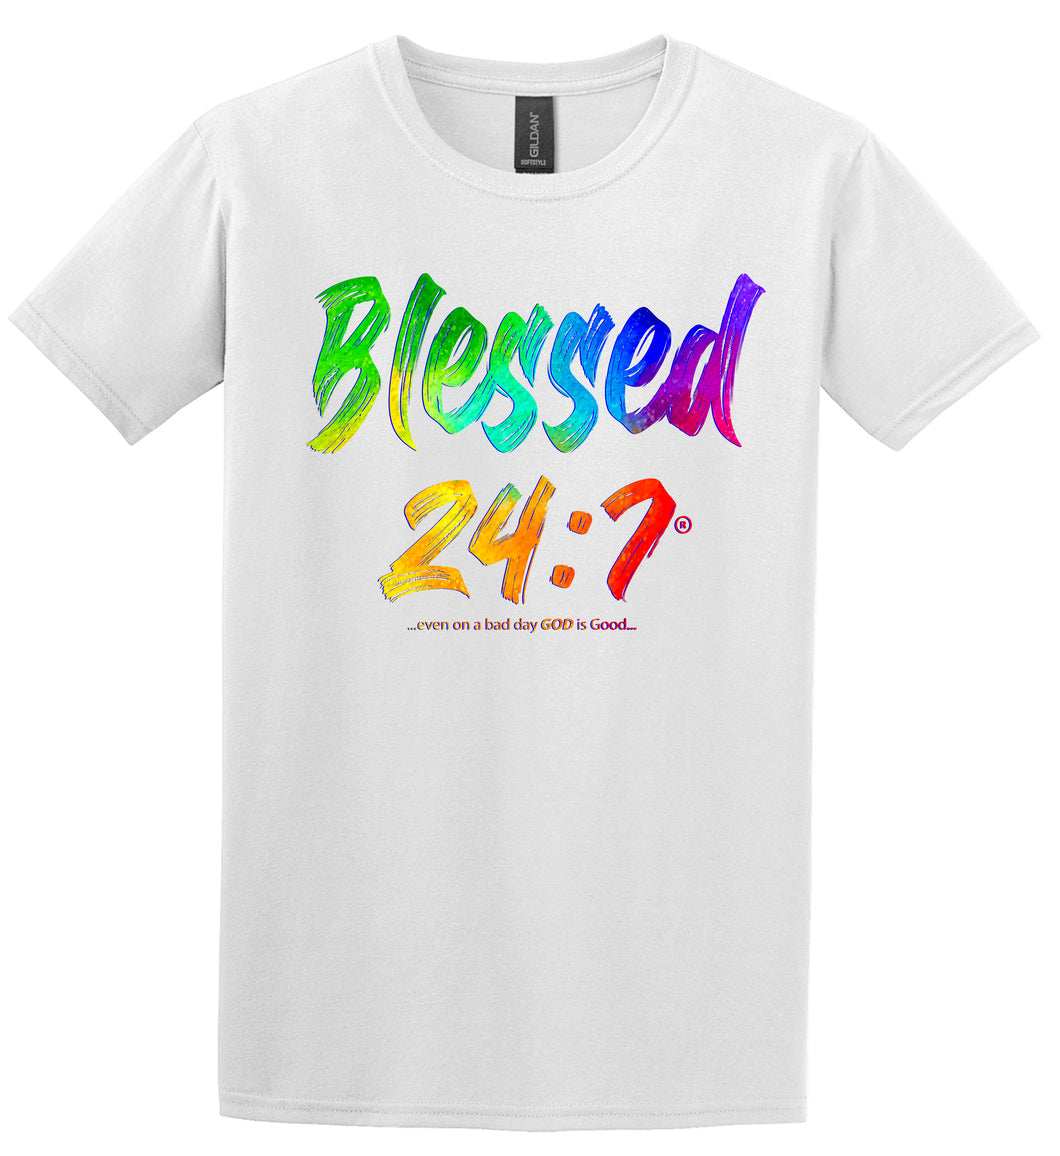 Blessed 24:7 (Watercolors) WHITE T-shirts FREE SHIPPING